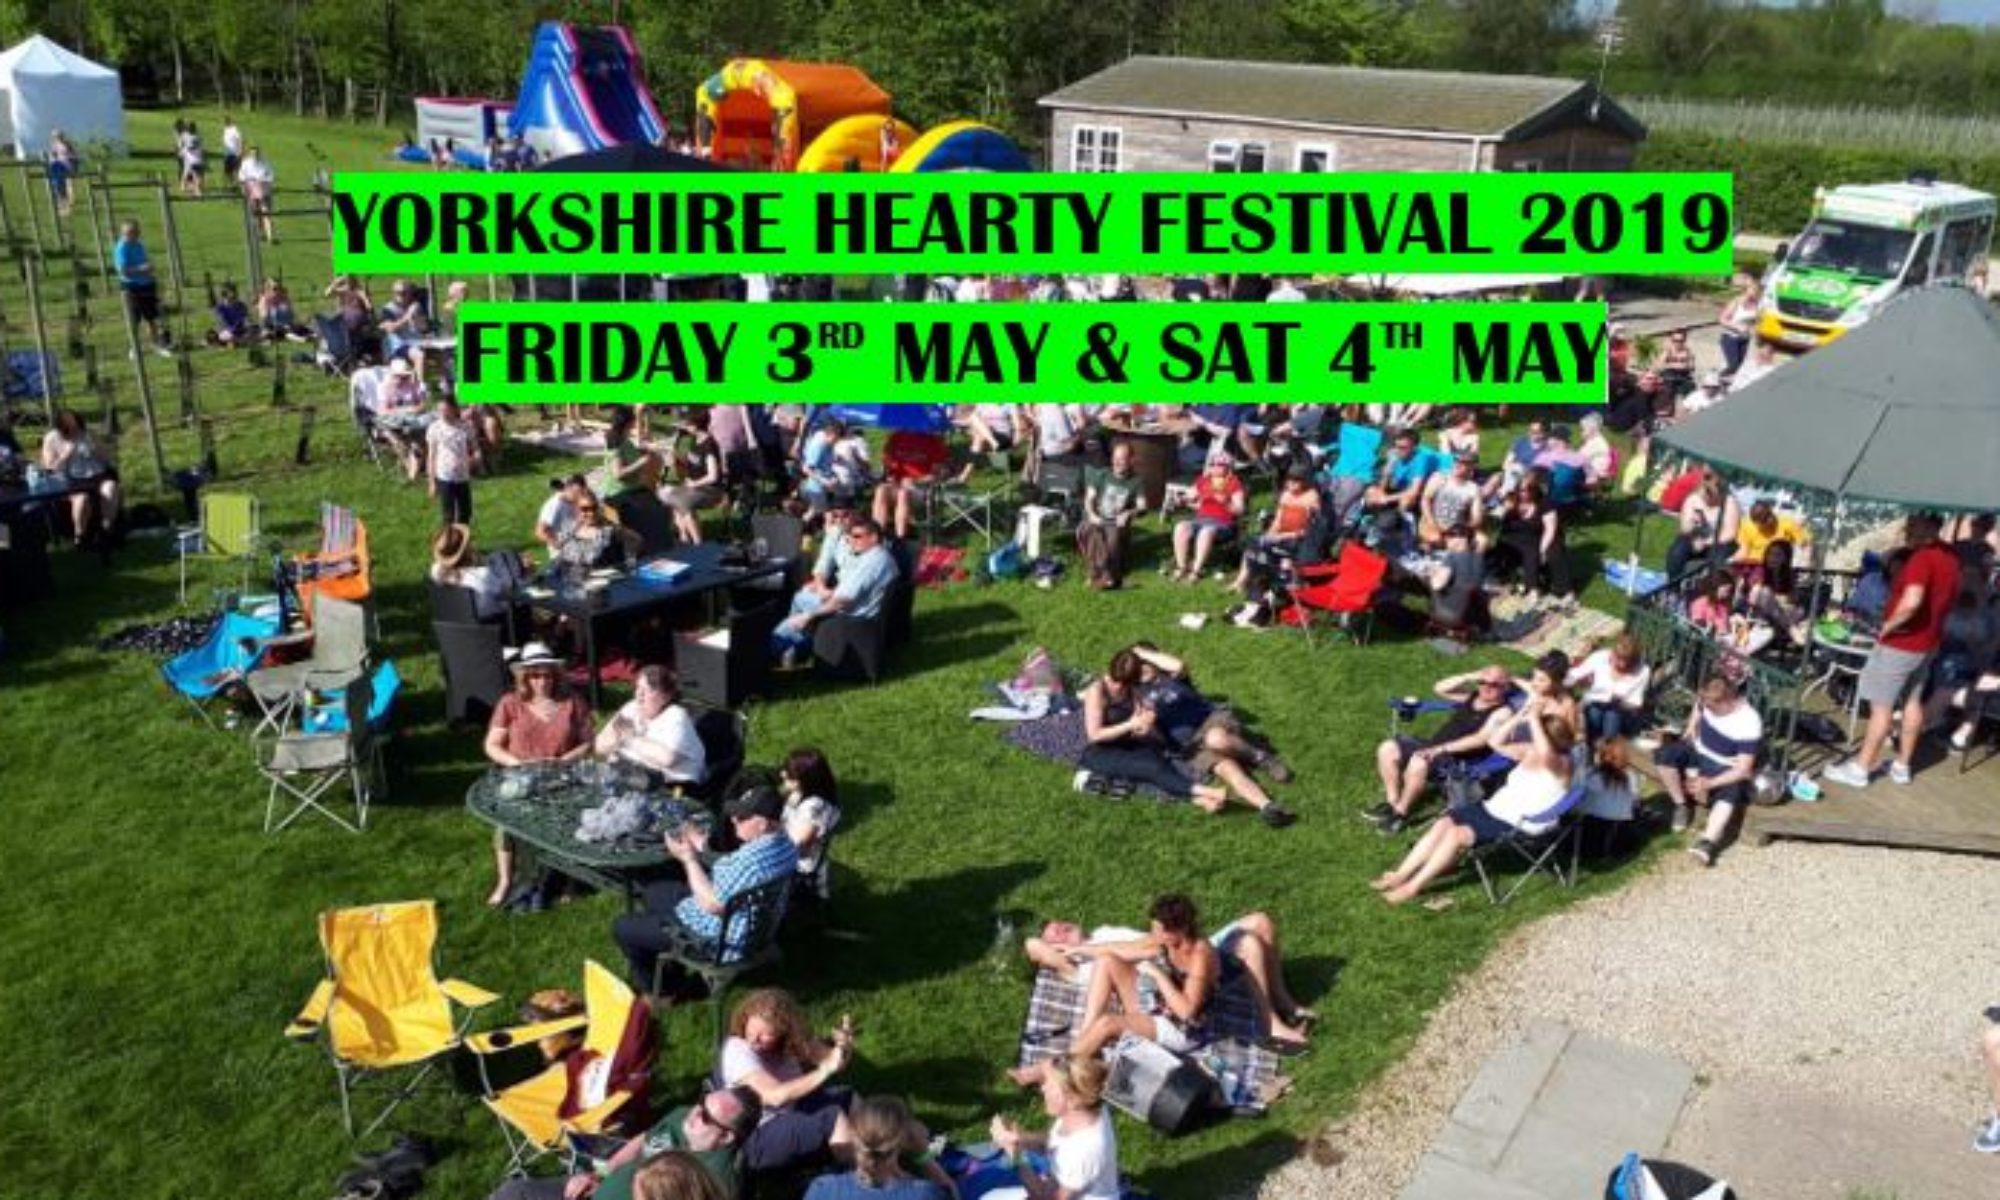 Yorkshire Heart Festival – A Heart Party for all the Family